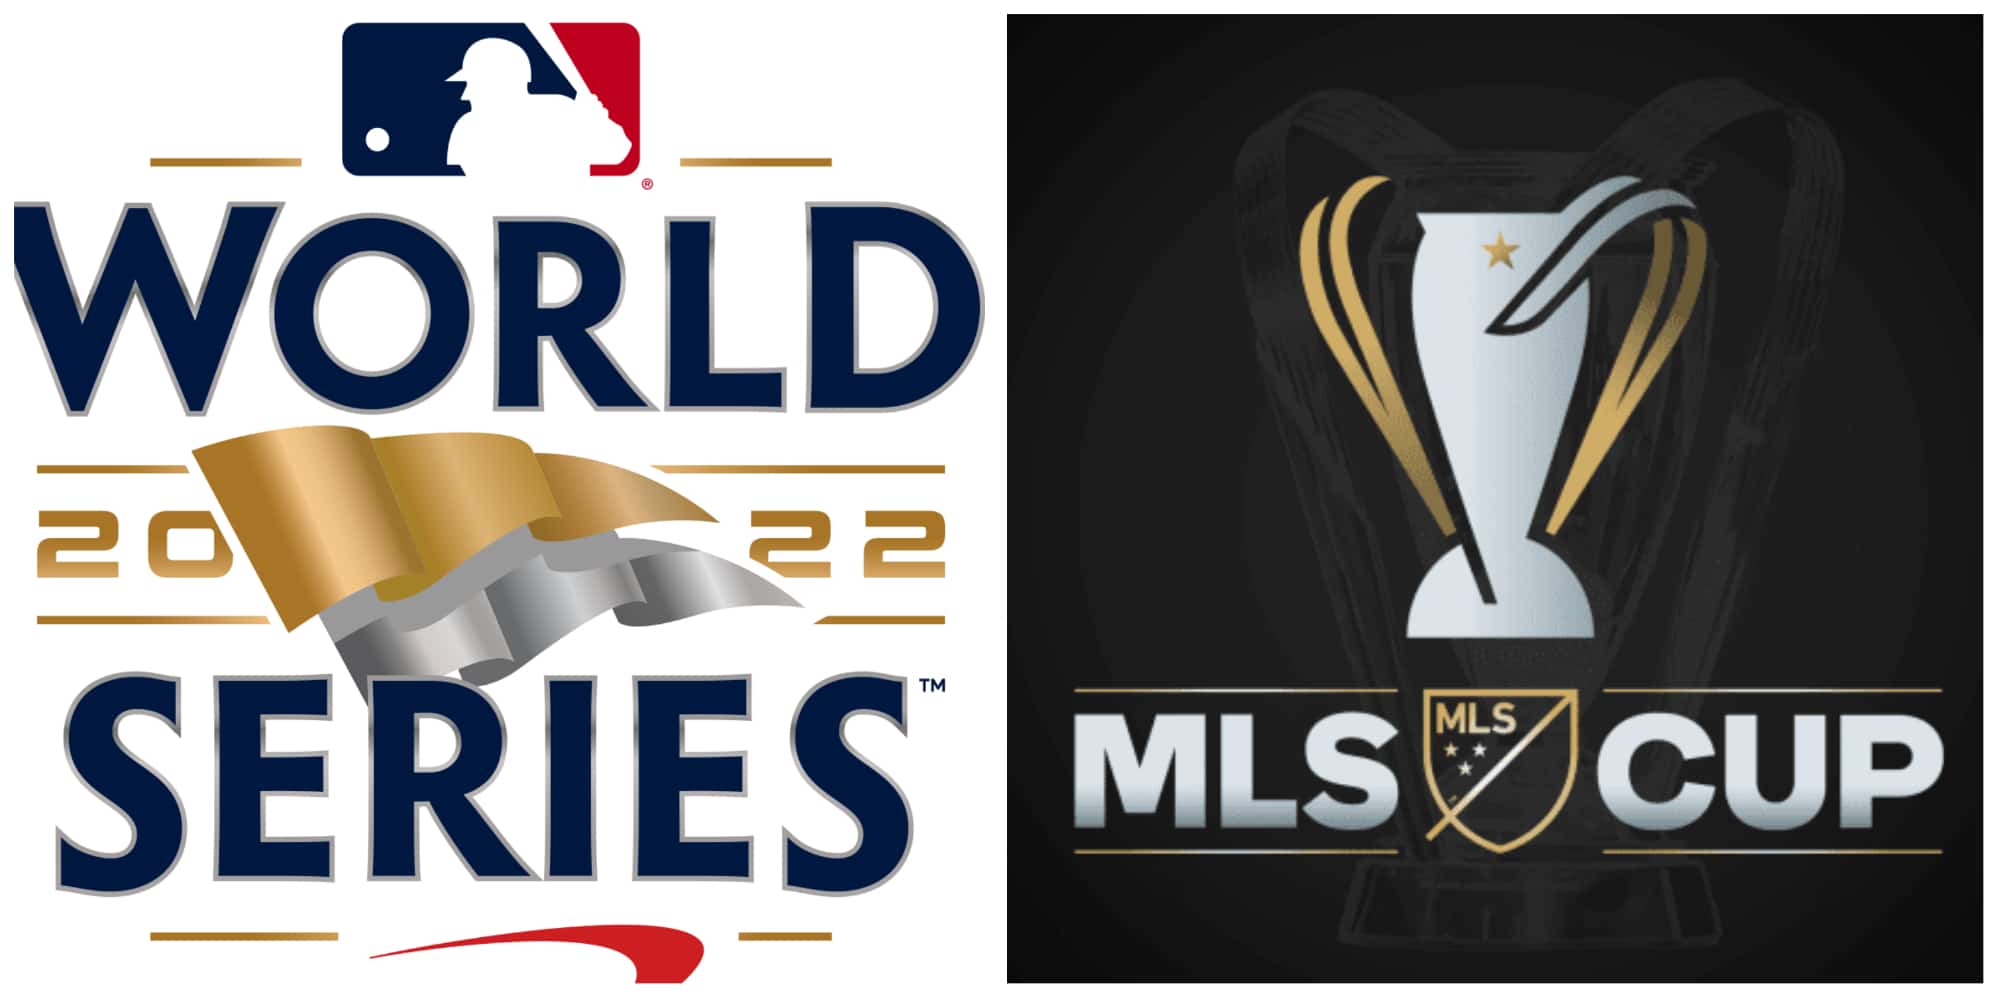 We’ve Got TV Ratings for the World Series and MLS Cup